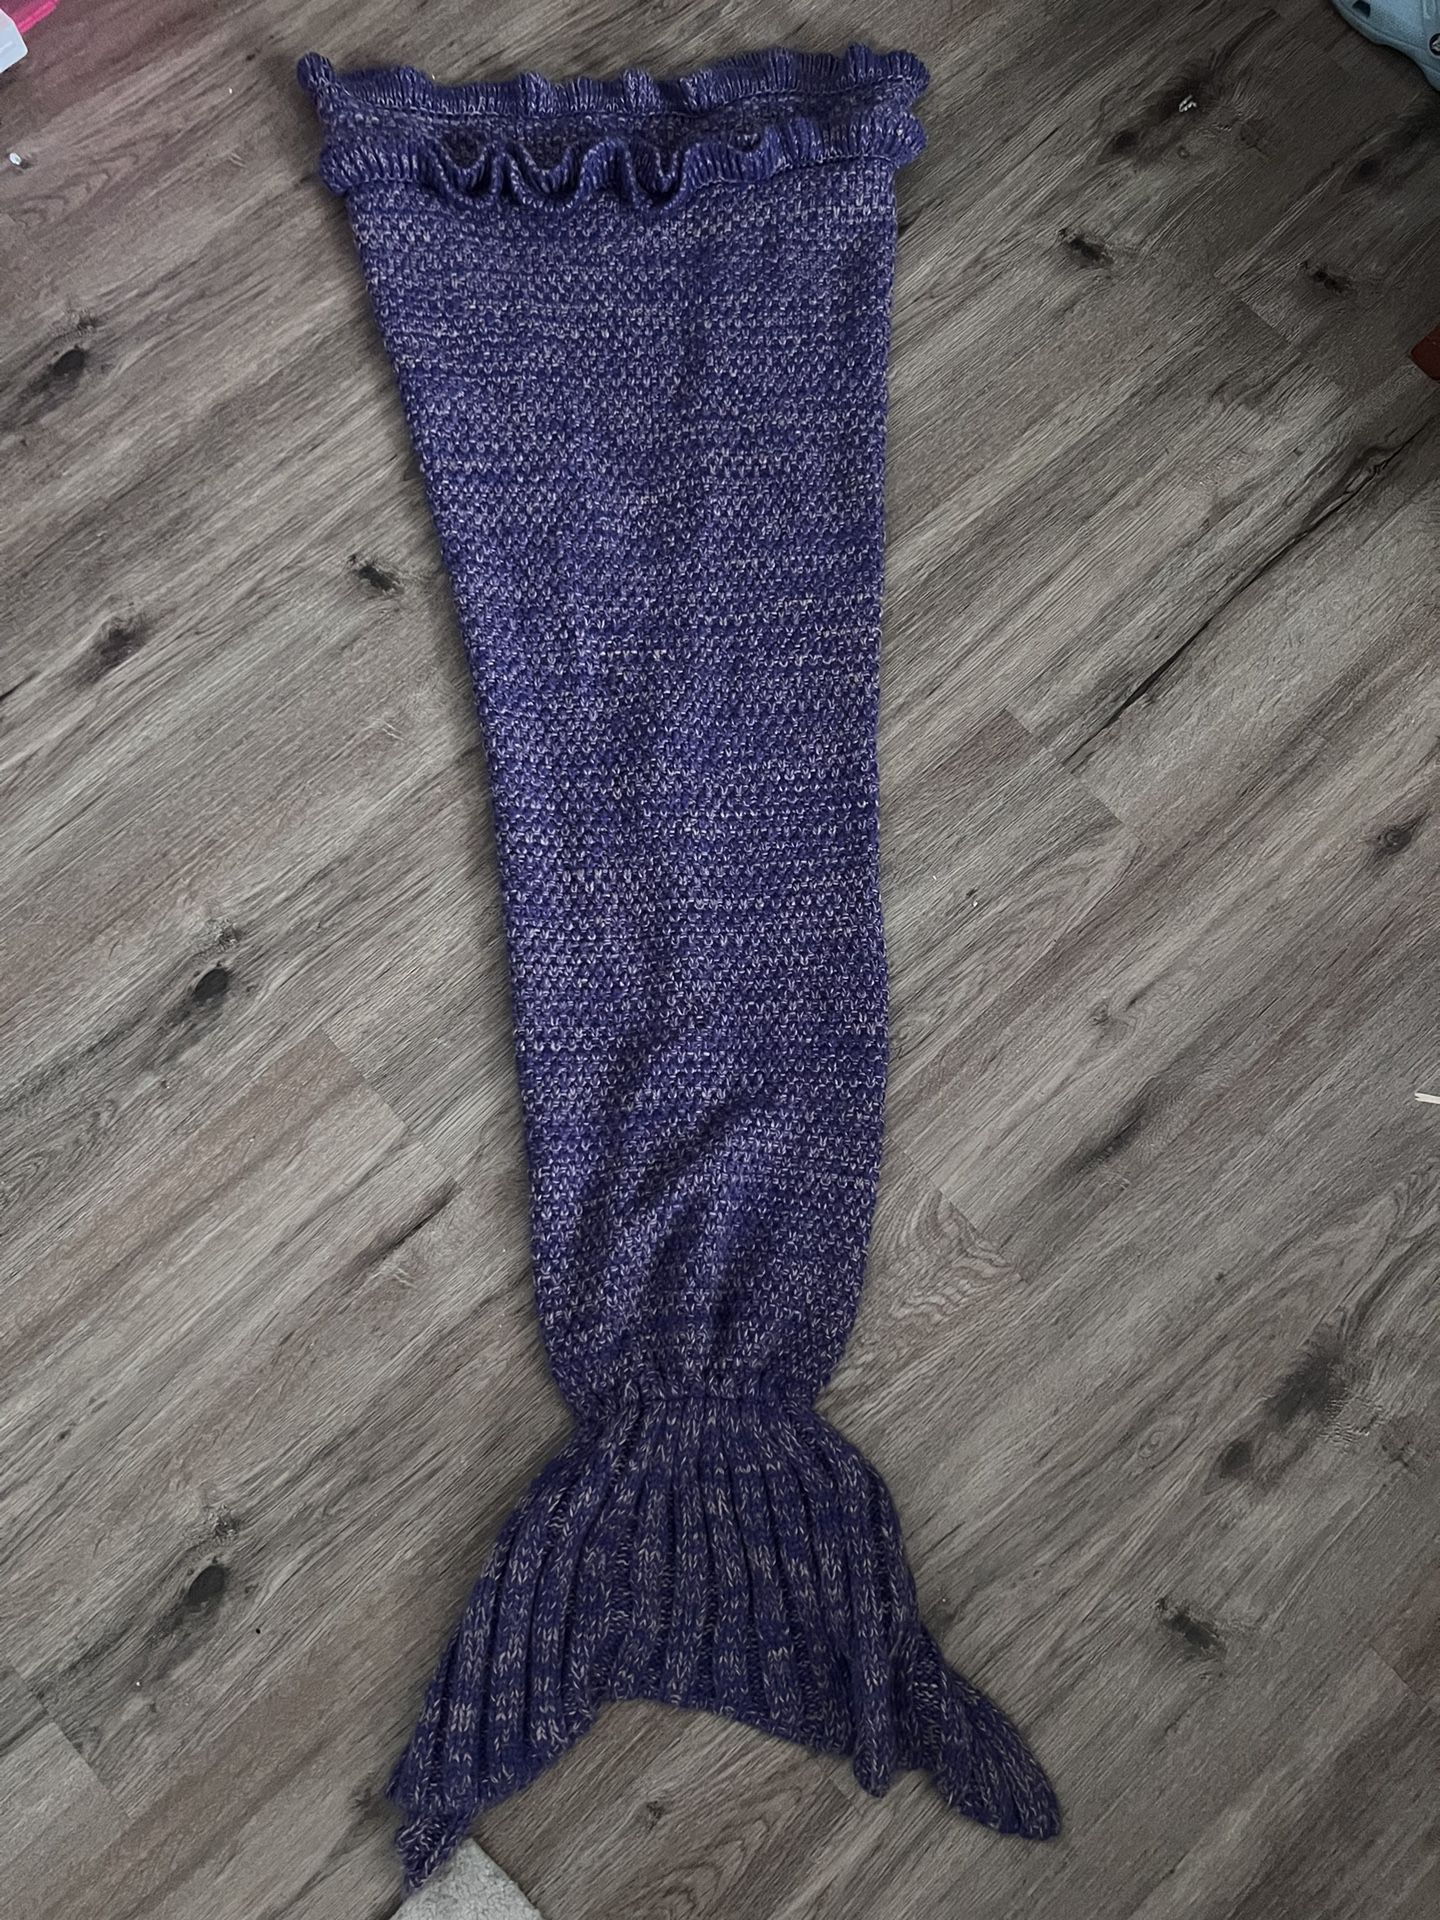 Knitted mermaid Tail 